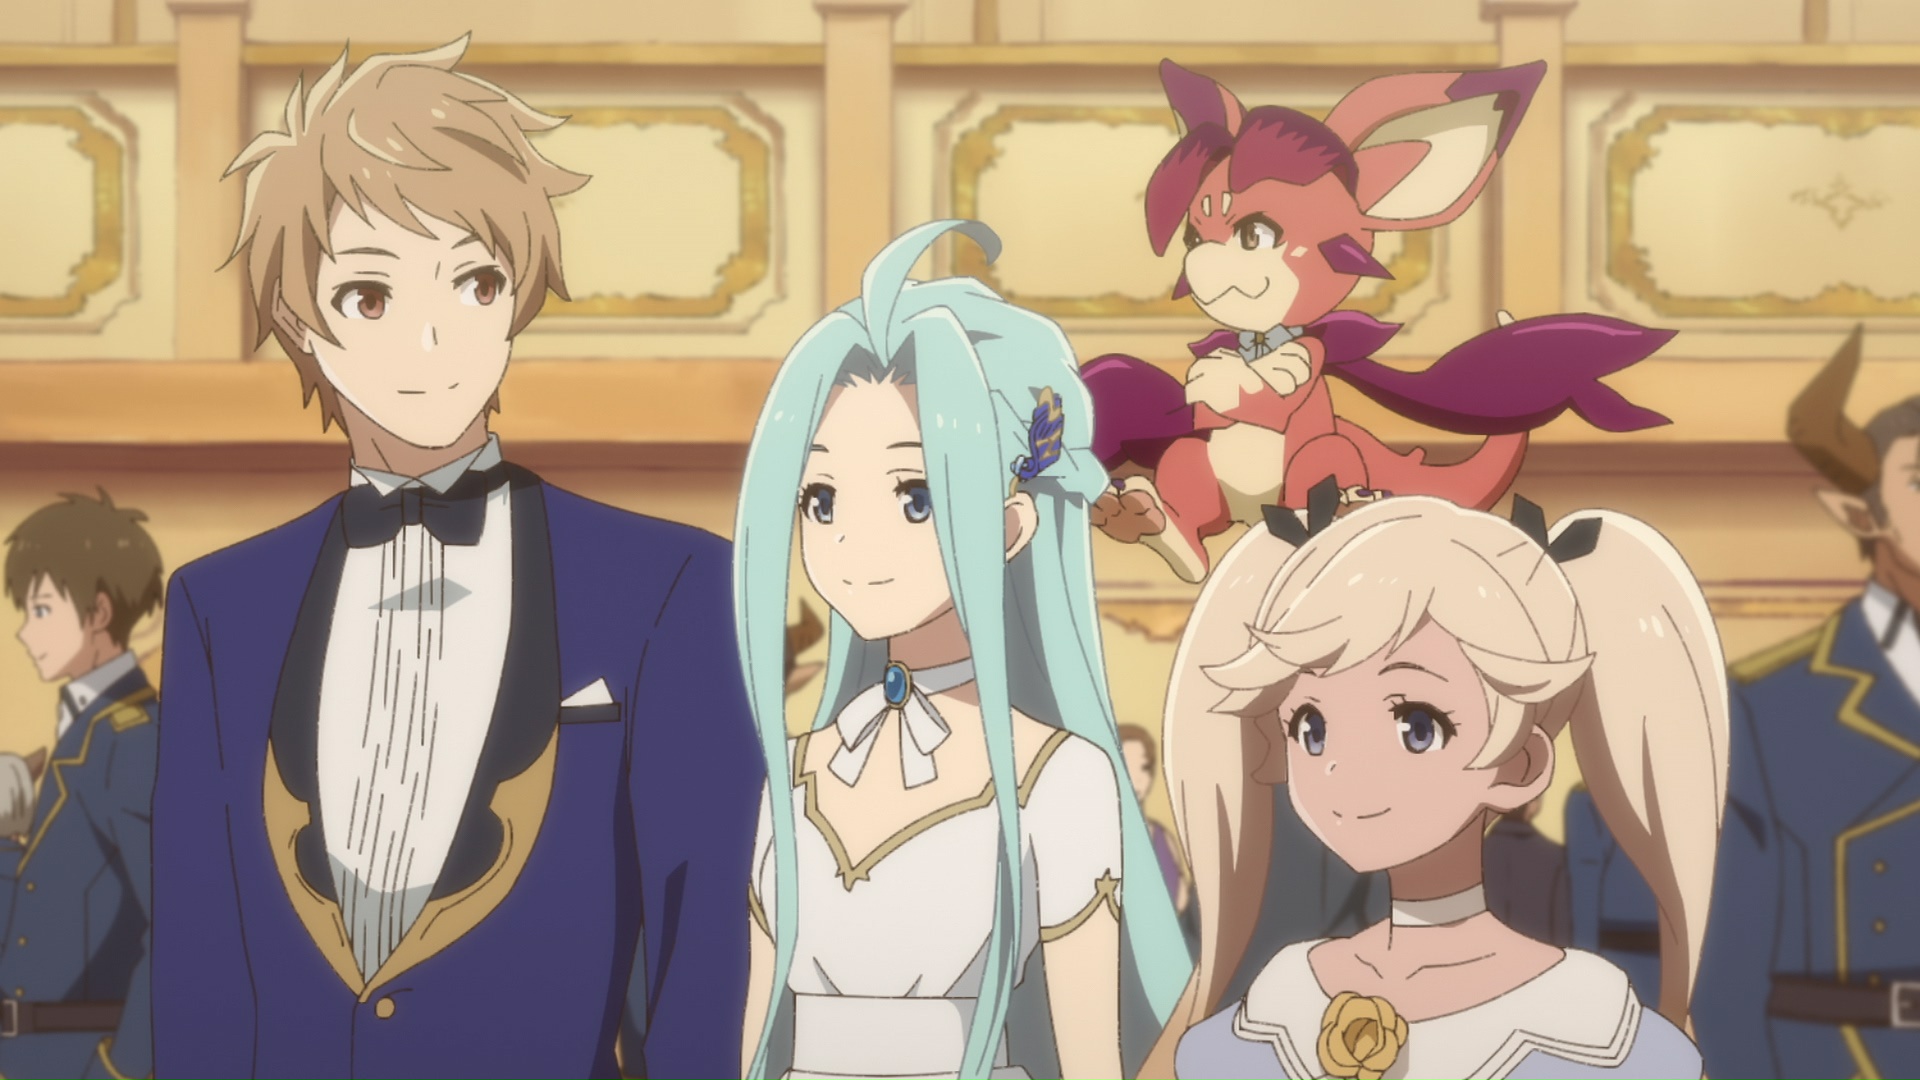 The third episode of Granblue Fantasy: The Animation Season 2 is